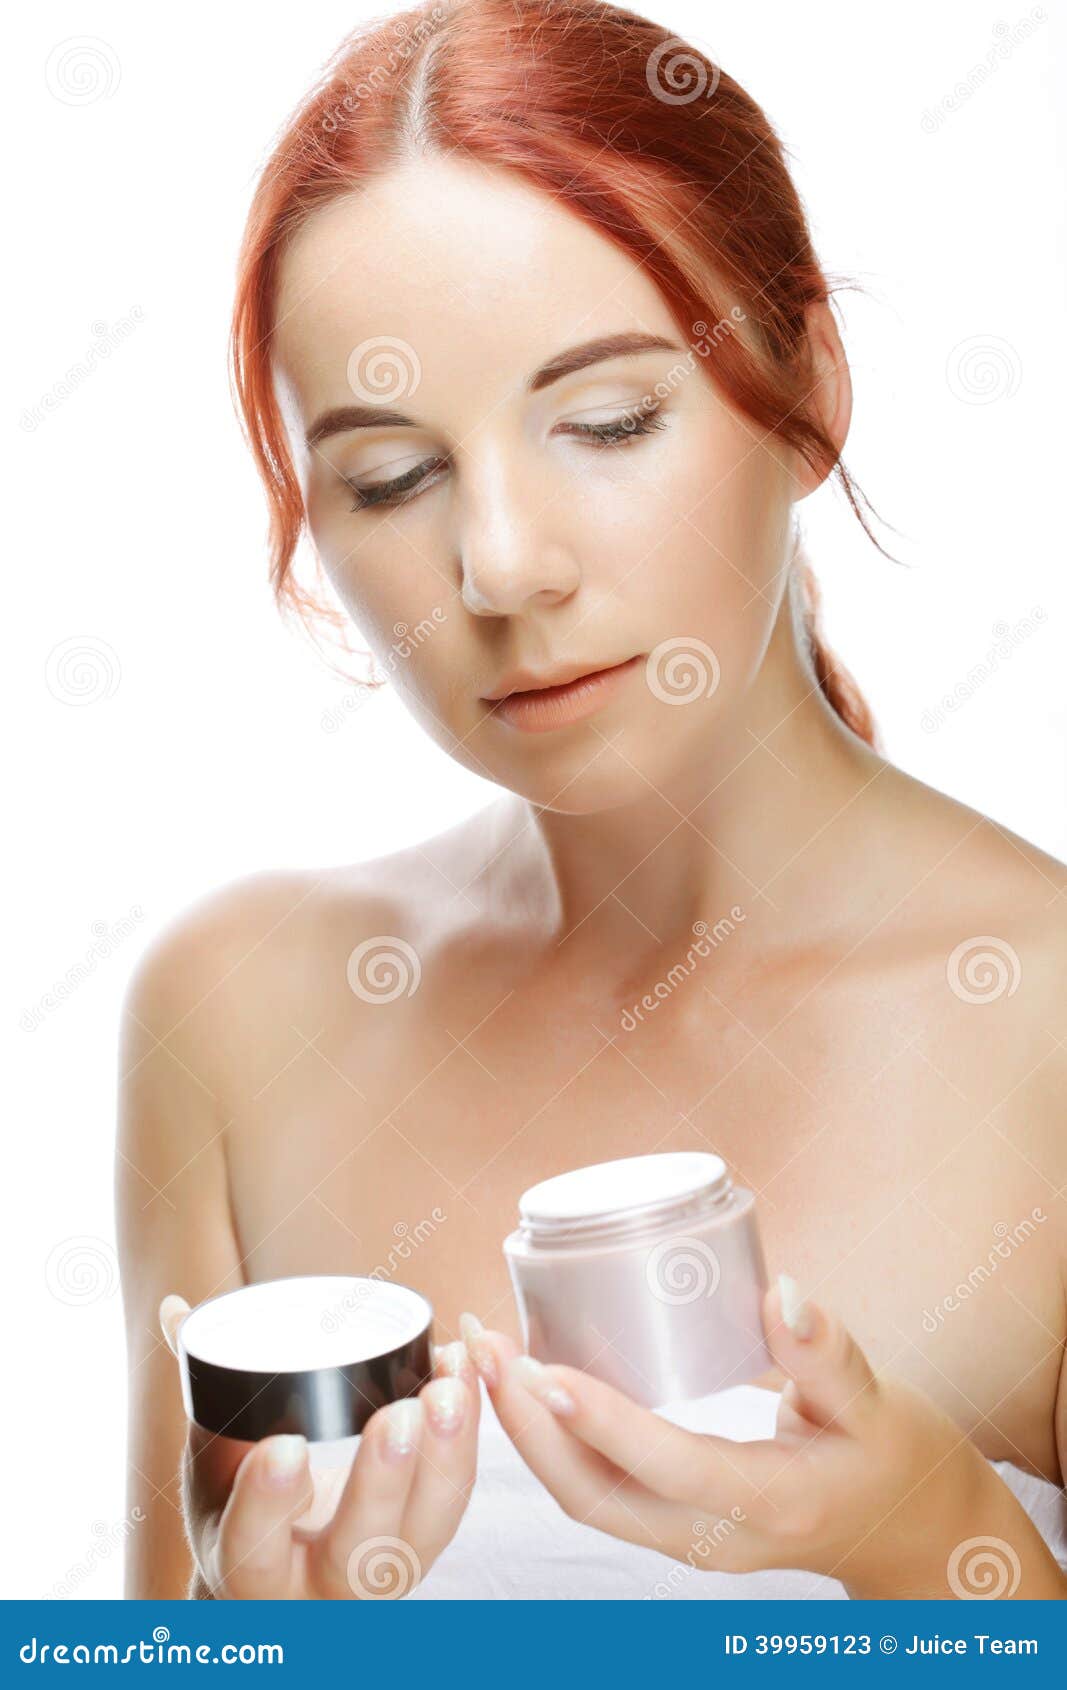 Smiling Woman Applying Cream On Her Face Stock Image Image Of Artificial Healthcare 39959123